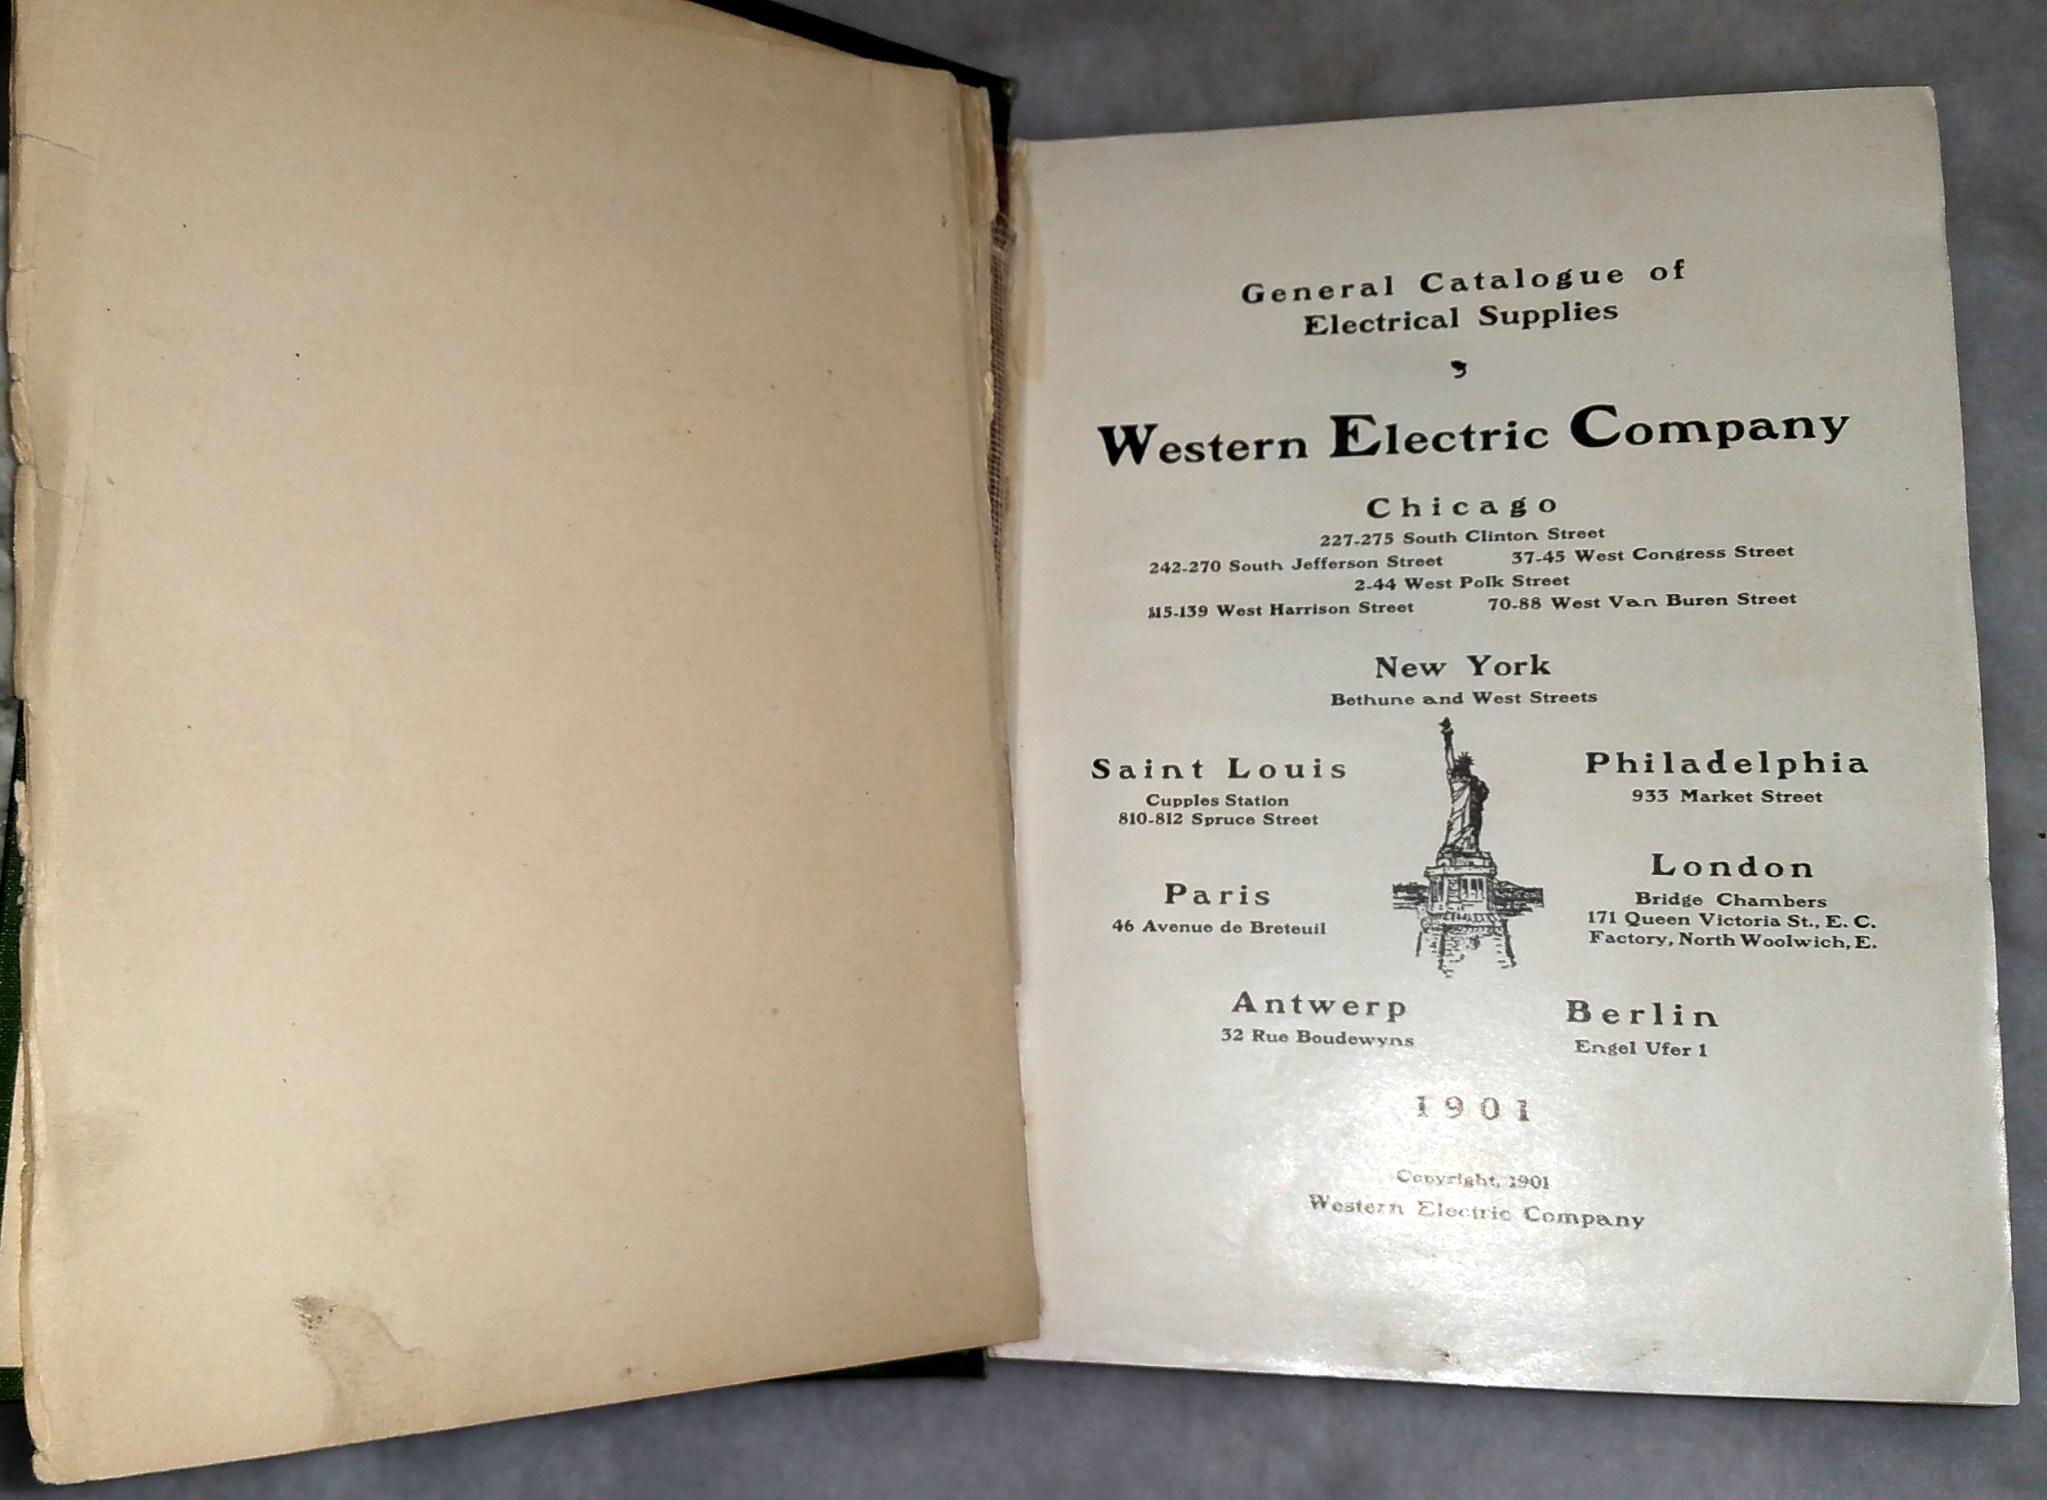 General Catalogue Of Electrical Supplies Western Electric Company Fair Cloth Hard Cover 1901 First Edition Thus Lloyd Zimmer Books And Maps